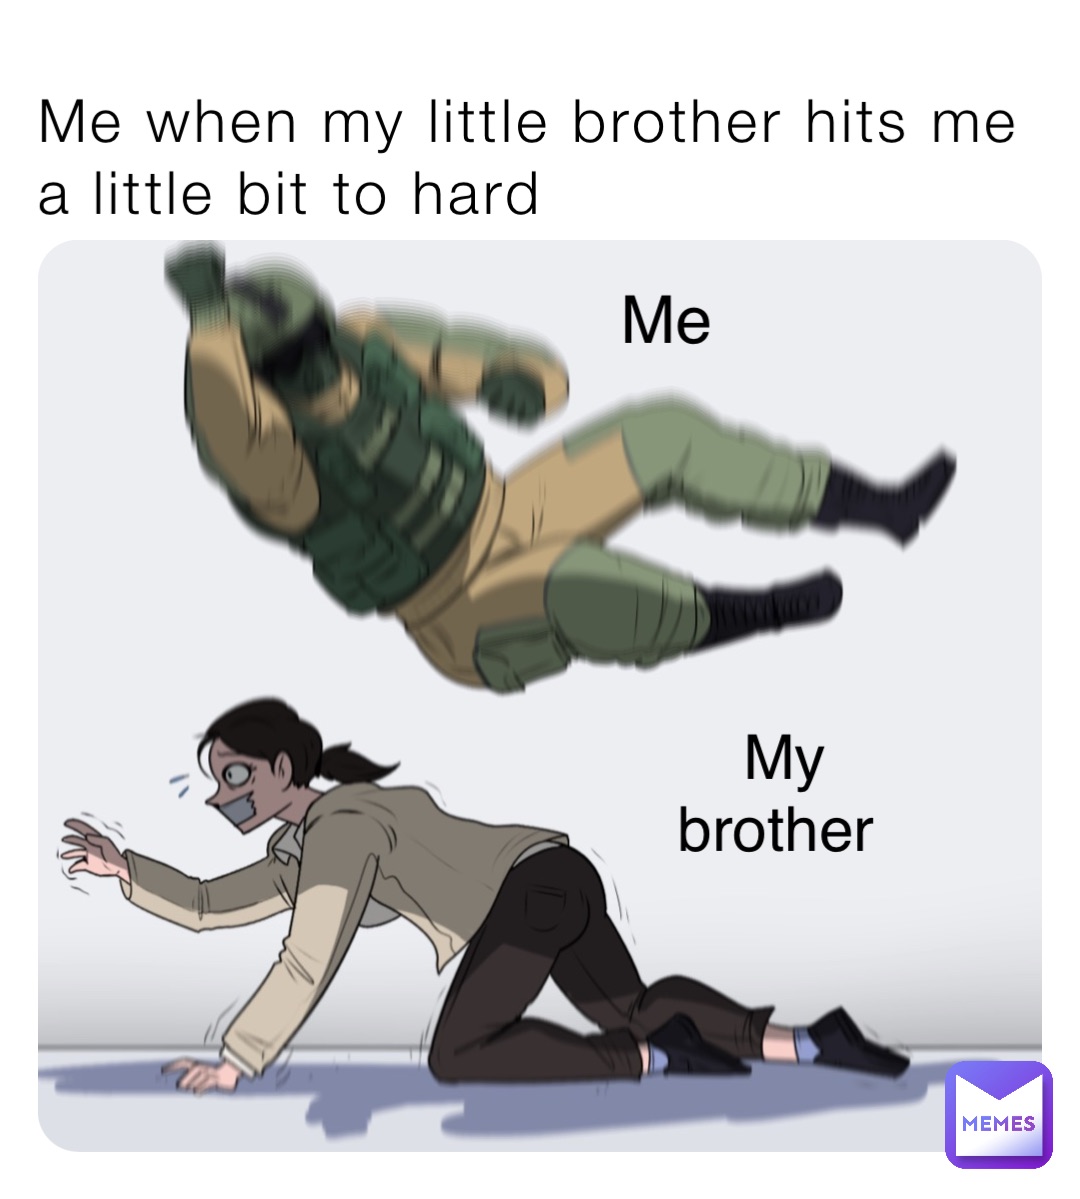 Me when my little brother hits me a little bit to hard Me My brother